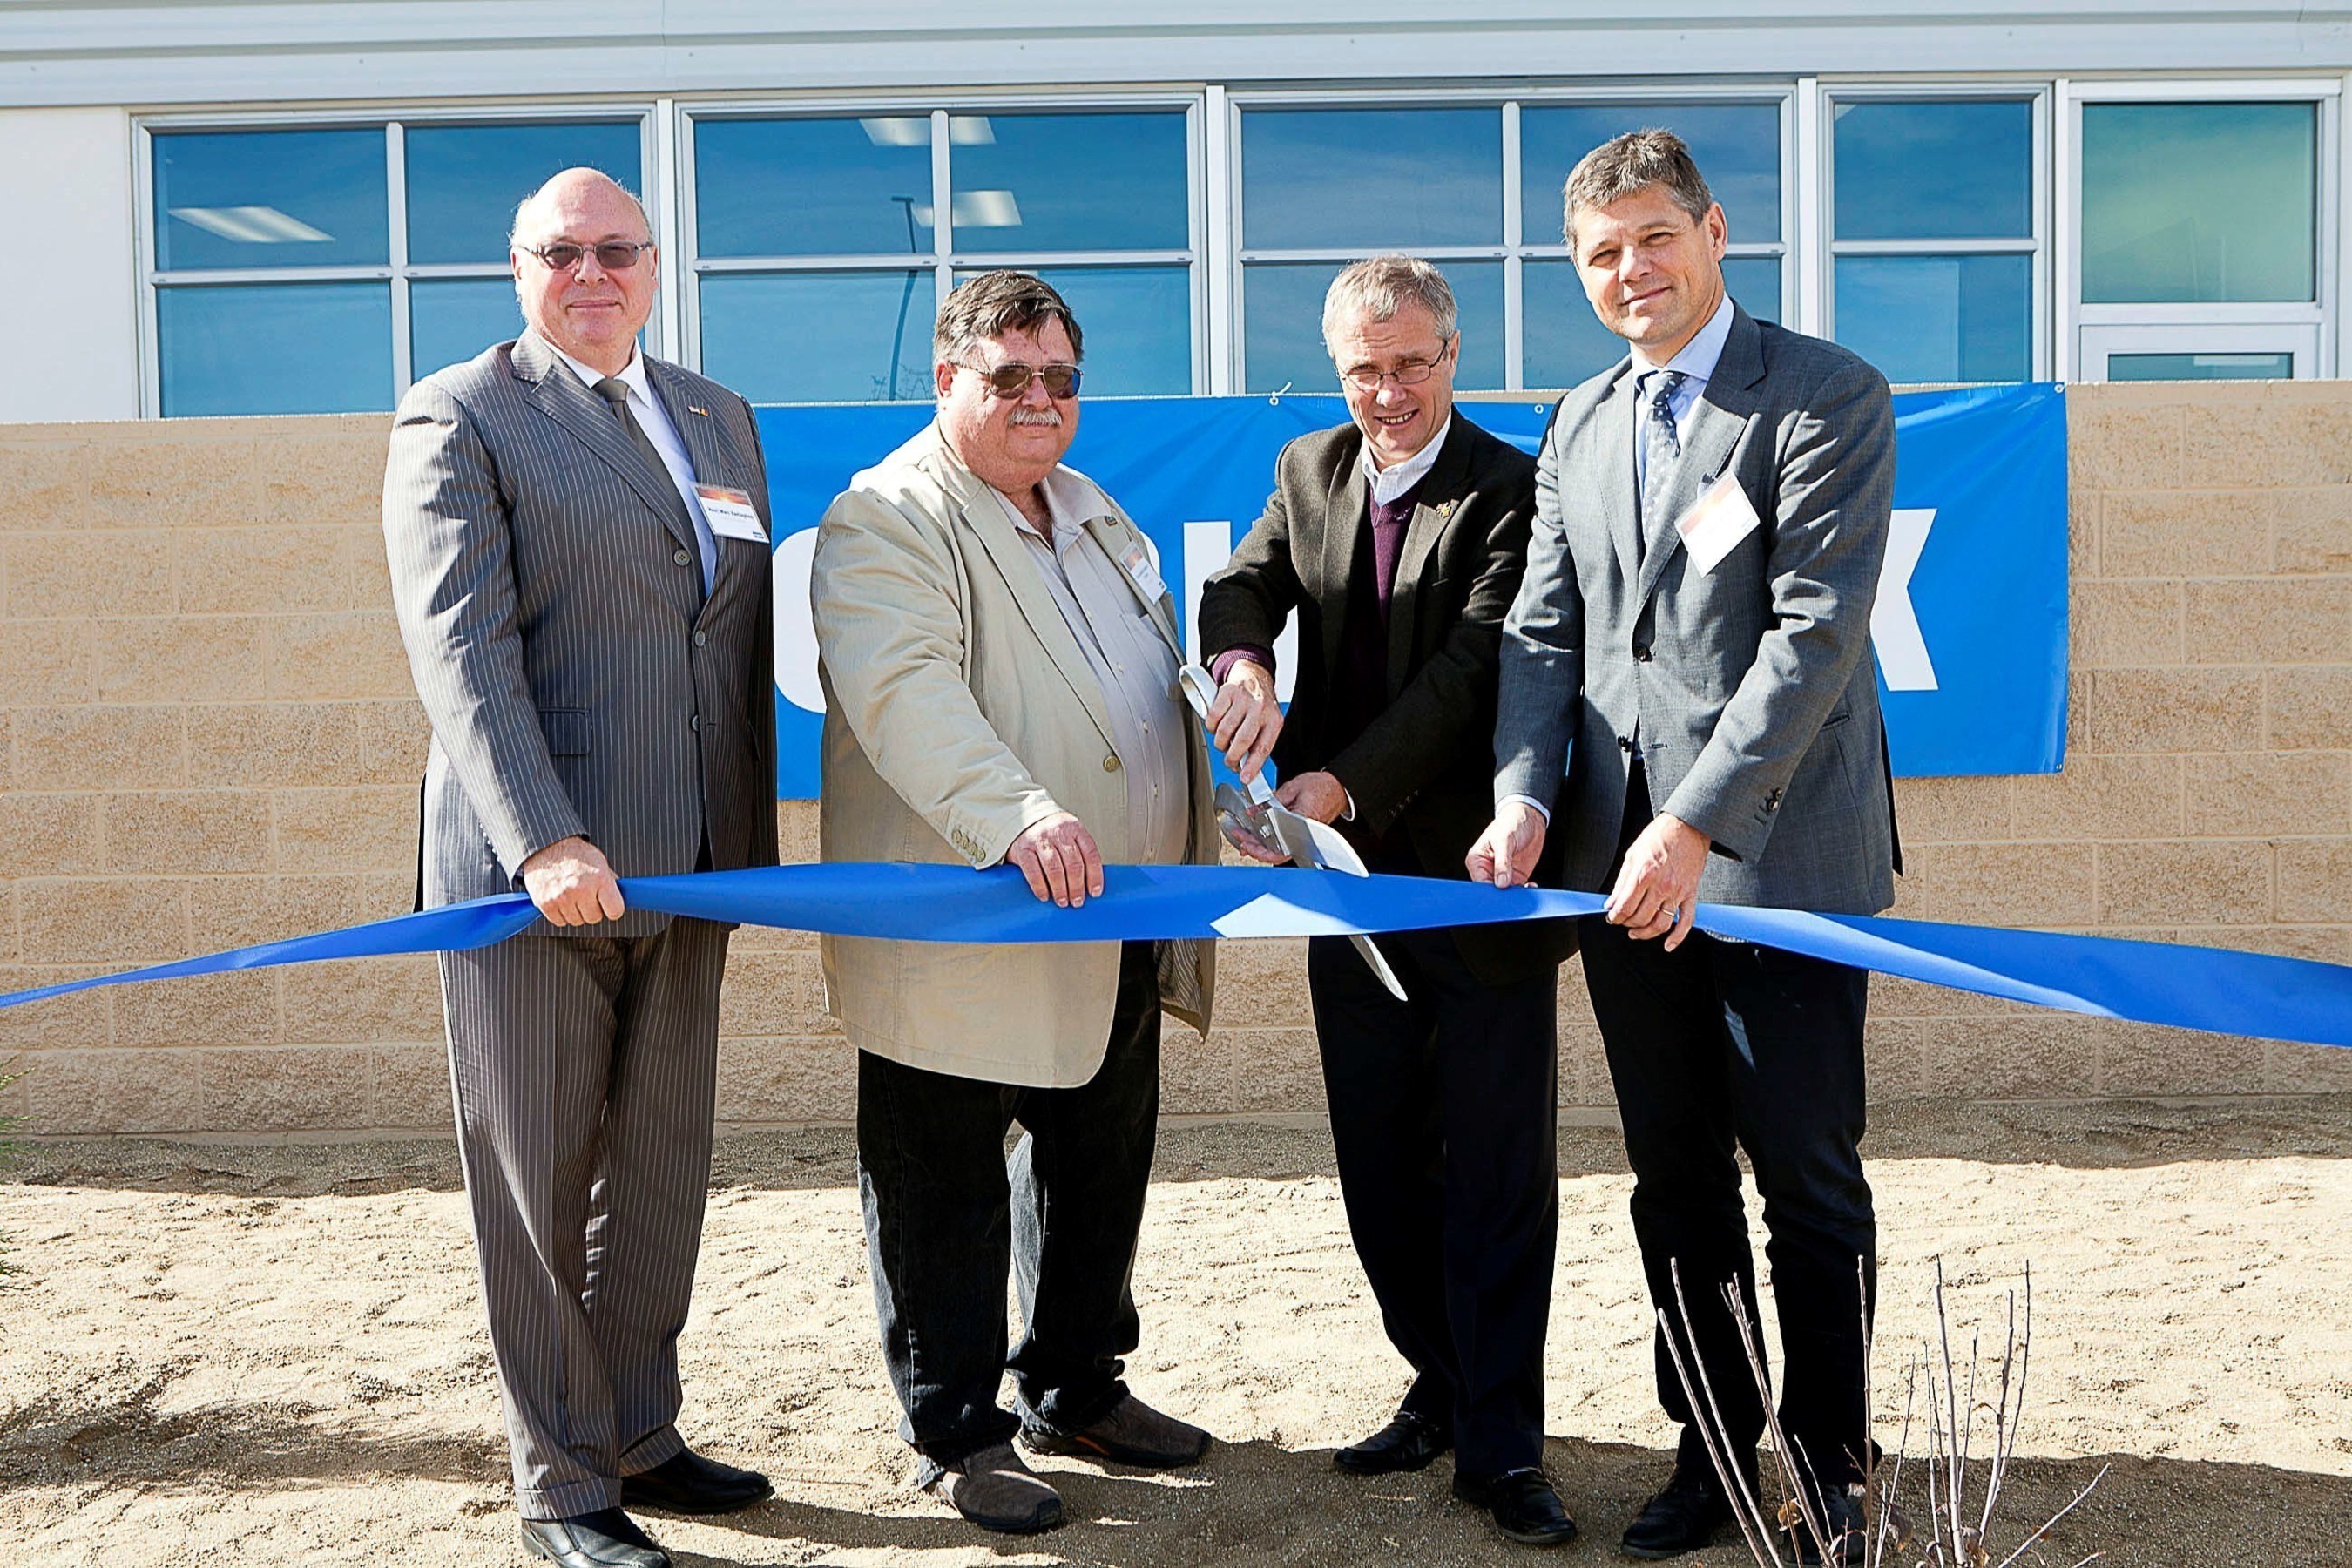 Deceuninck North America marked a significant milestone in its continued growth with the grand opening of a 150,000-square-foot-facility near Reno, Nevada, on Saturday, October 22. Pictured at the ribbon cutting from left to right are: Henri Vantieghem, Consul General of Belgium in Los Angeles; Roy Edgington Jr., Mayor, Fernley, Nevada; Filip Geeraert, president and CEO, Deceuninck North America; Francis Van Eeckhout, CEO, Deceuninck Group